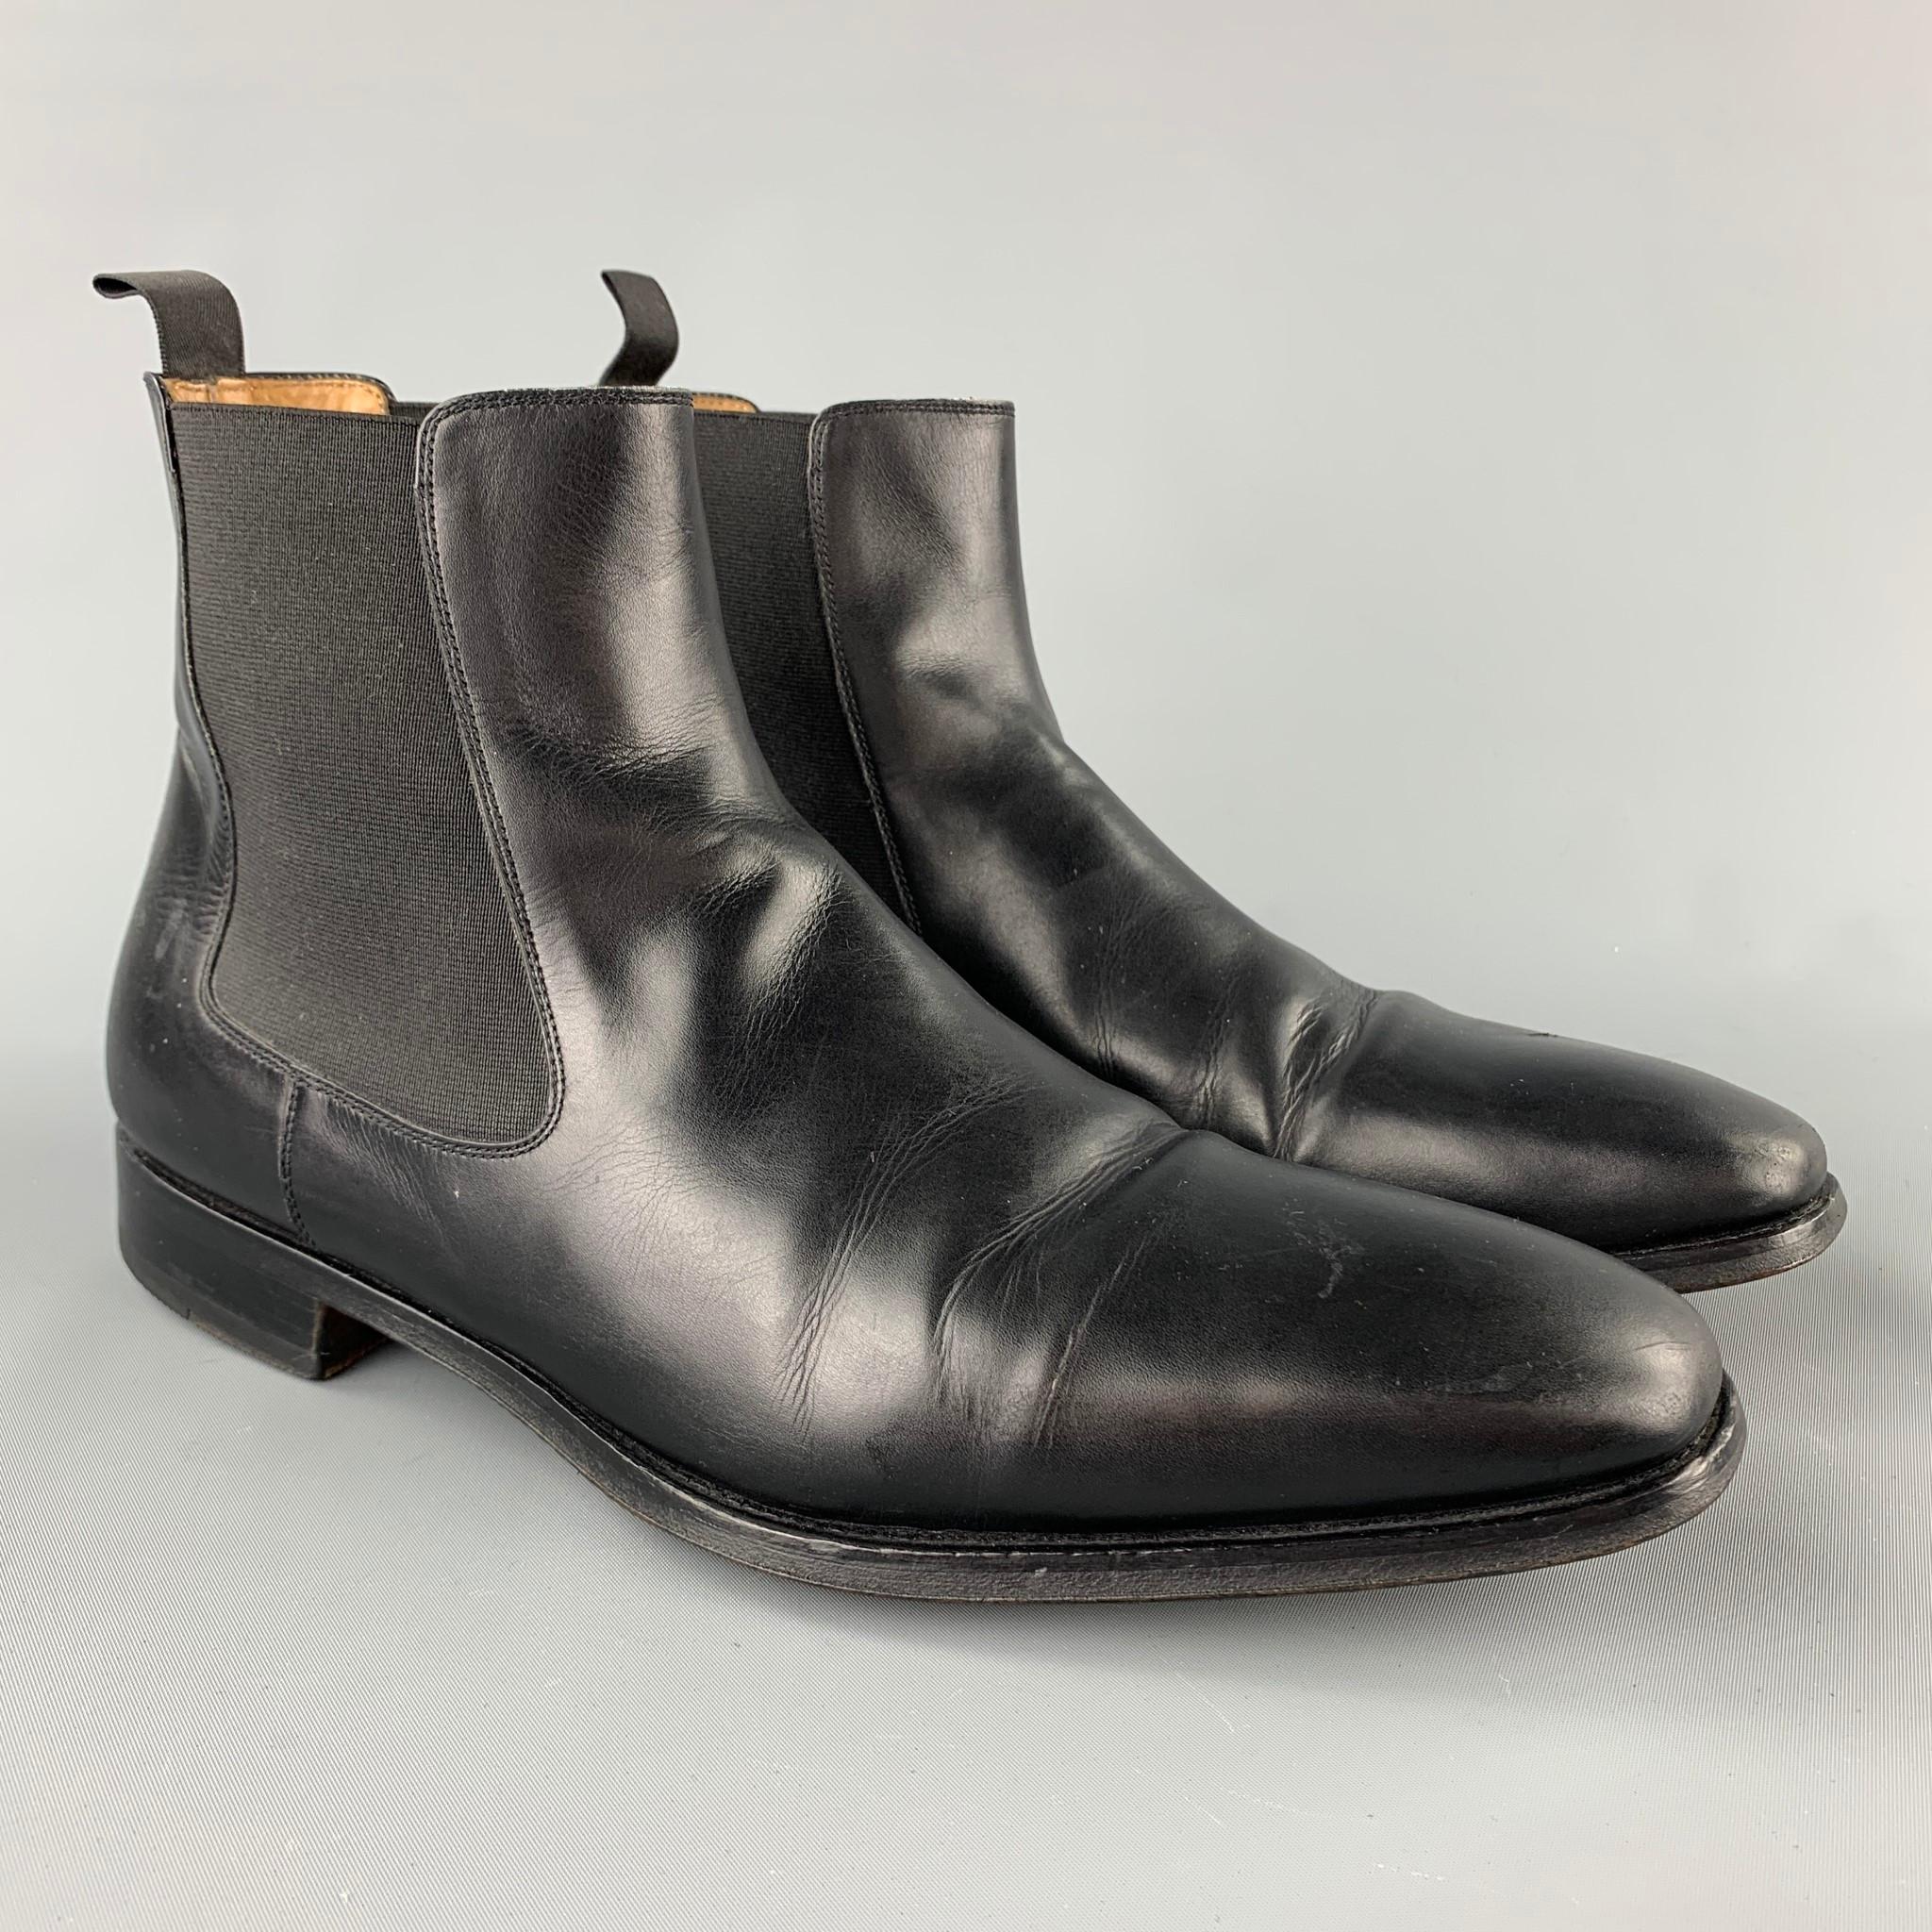 SAKS FIFTH AVENUE by MAGNANNI boots comes in a black leather featuring a pull on style, cap toe, and a wooden sole. Made in Spain.

Good Pre-Owned Condition.
Marked:12795 10.5 M

Measurement 

Length: 12 in.
Width: 4 in.
Height: 3 in. 